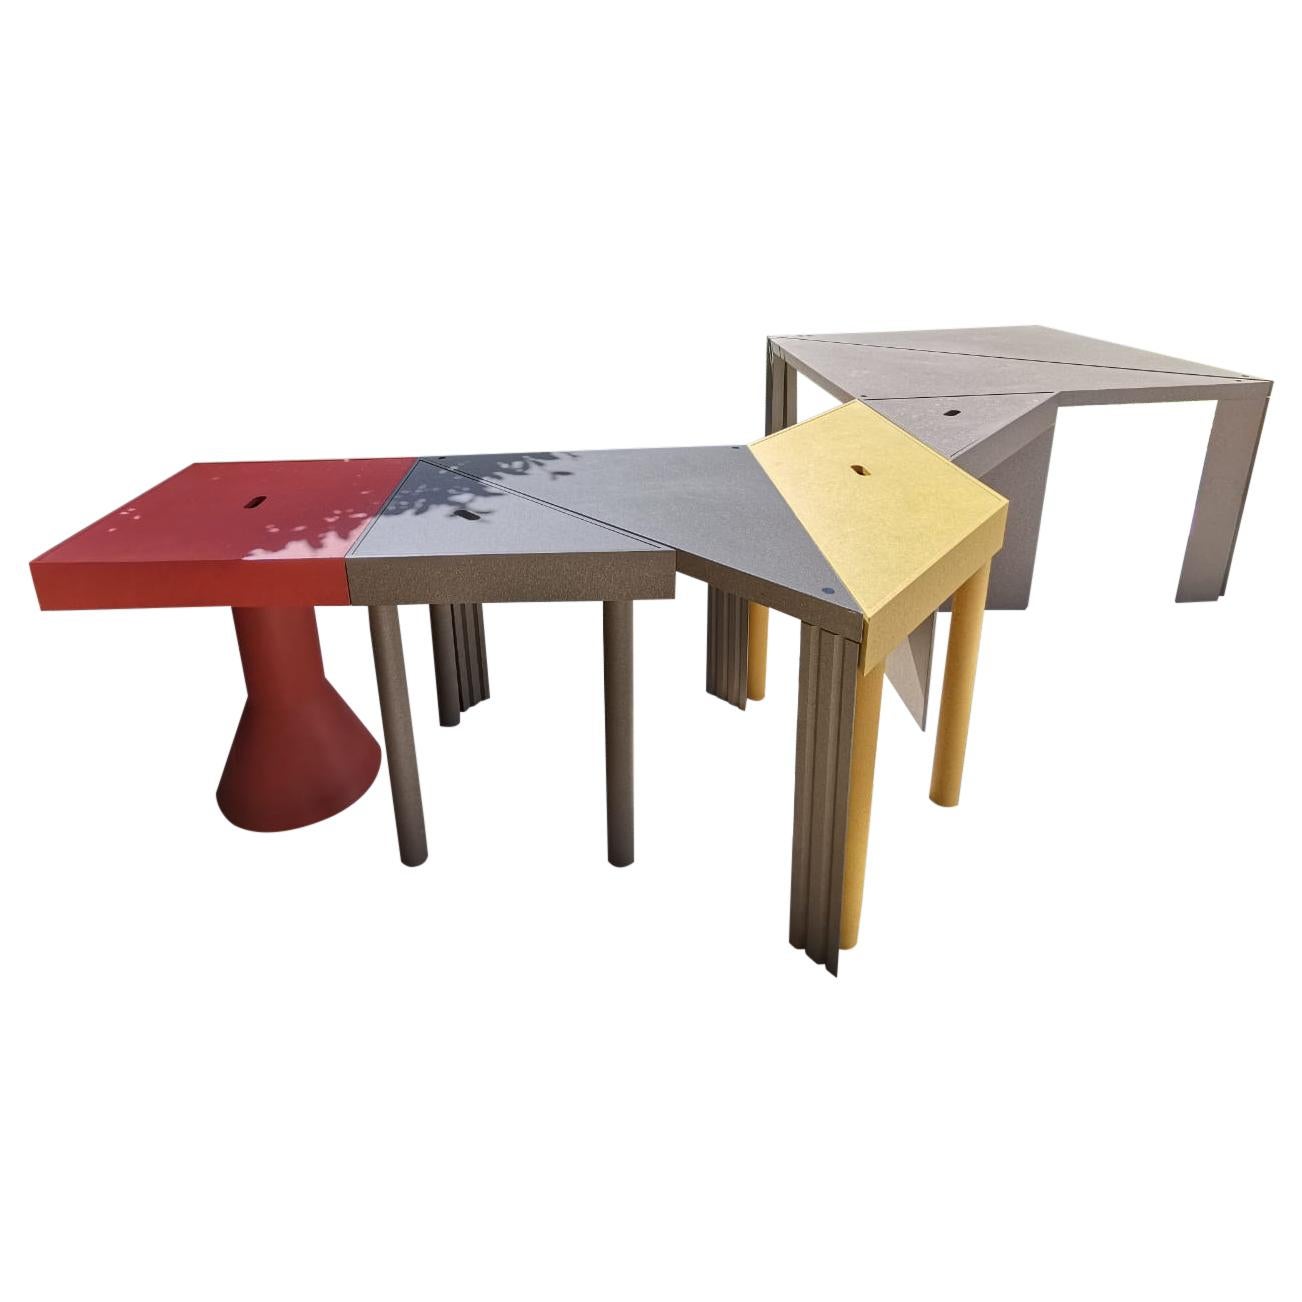 Tangram Set Table by M.Morozzi from Cassina, Italy, 1980s Archizoom  For Sale